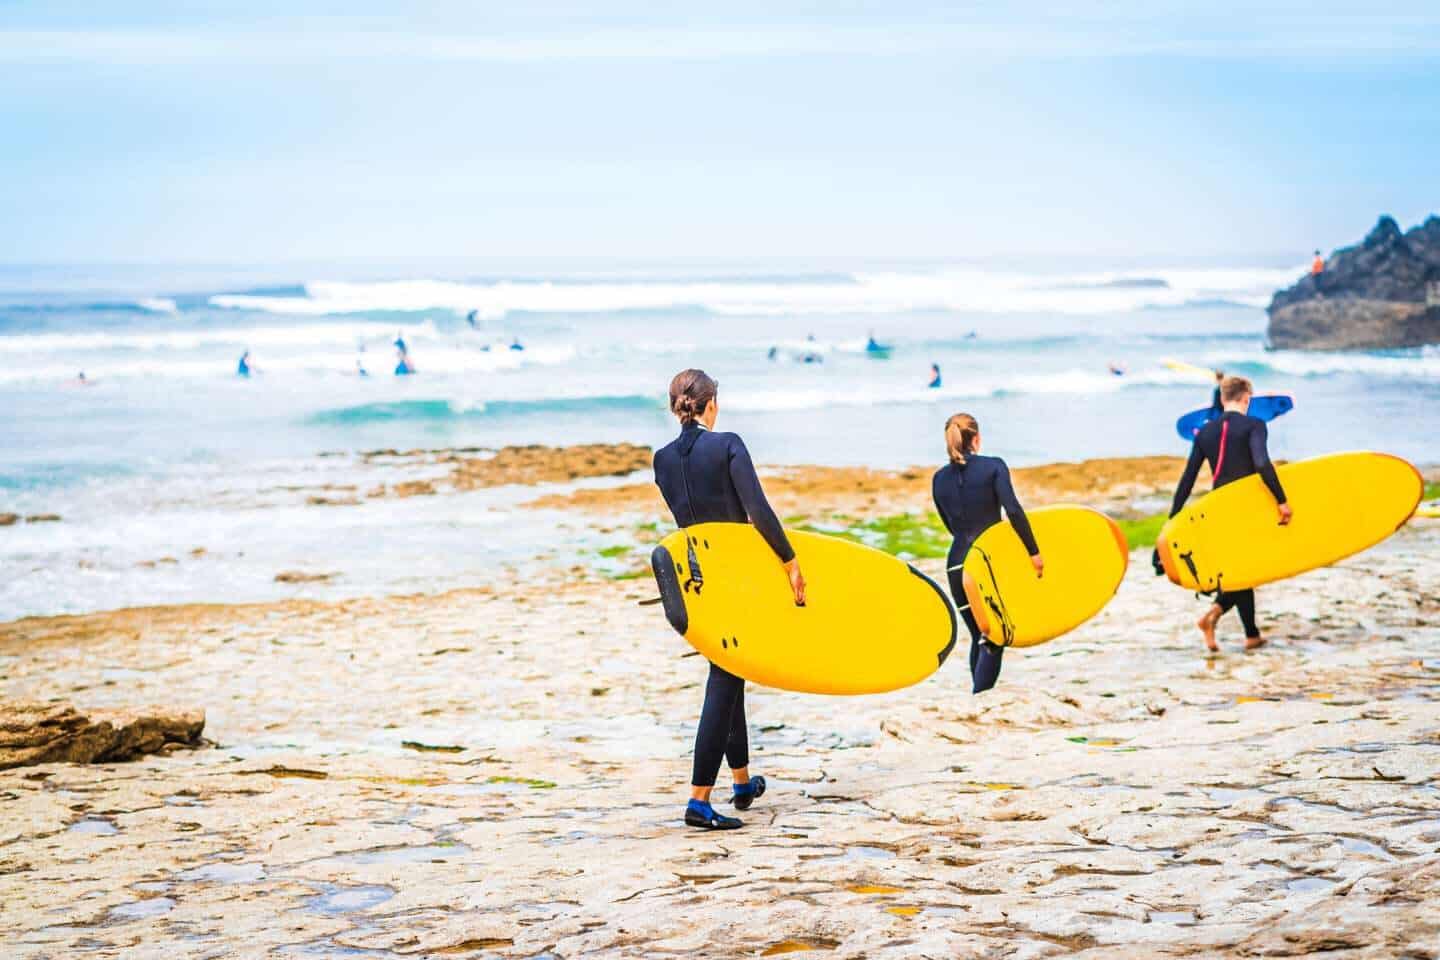 Group of surfer at the beach of Ribeira d'Ilhas